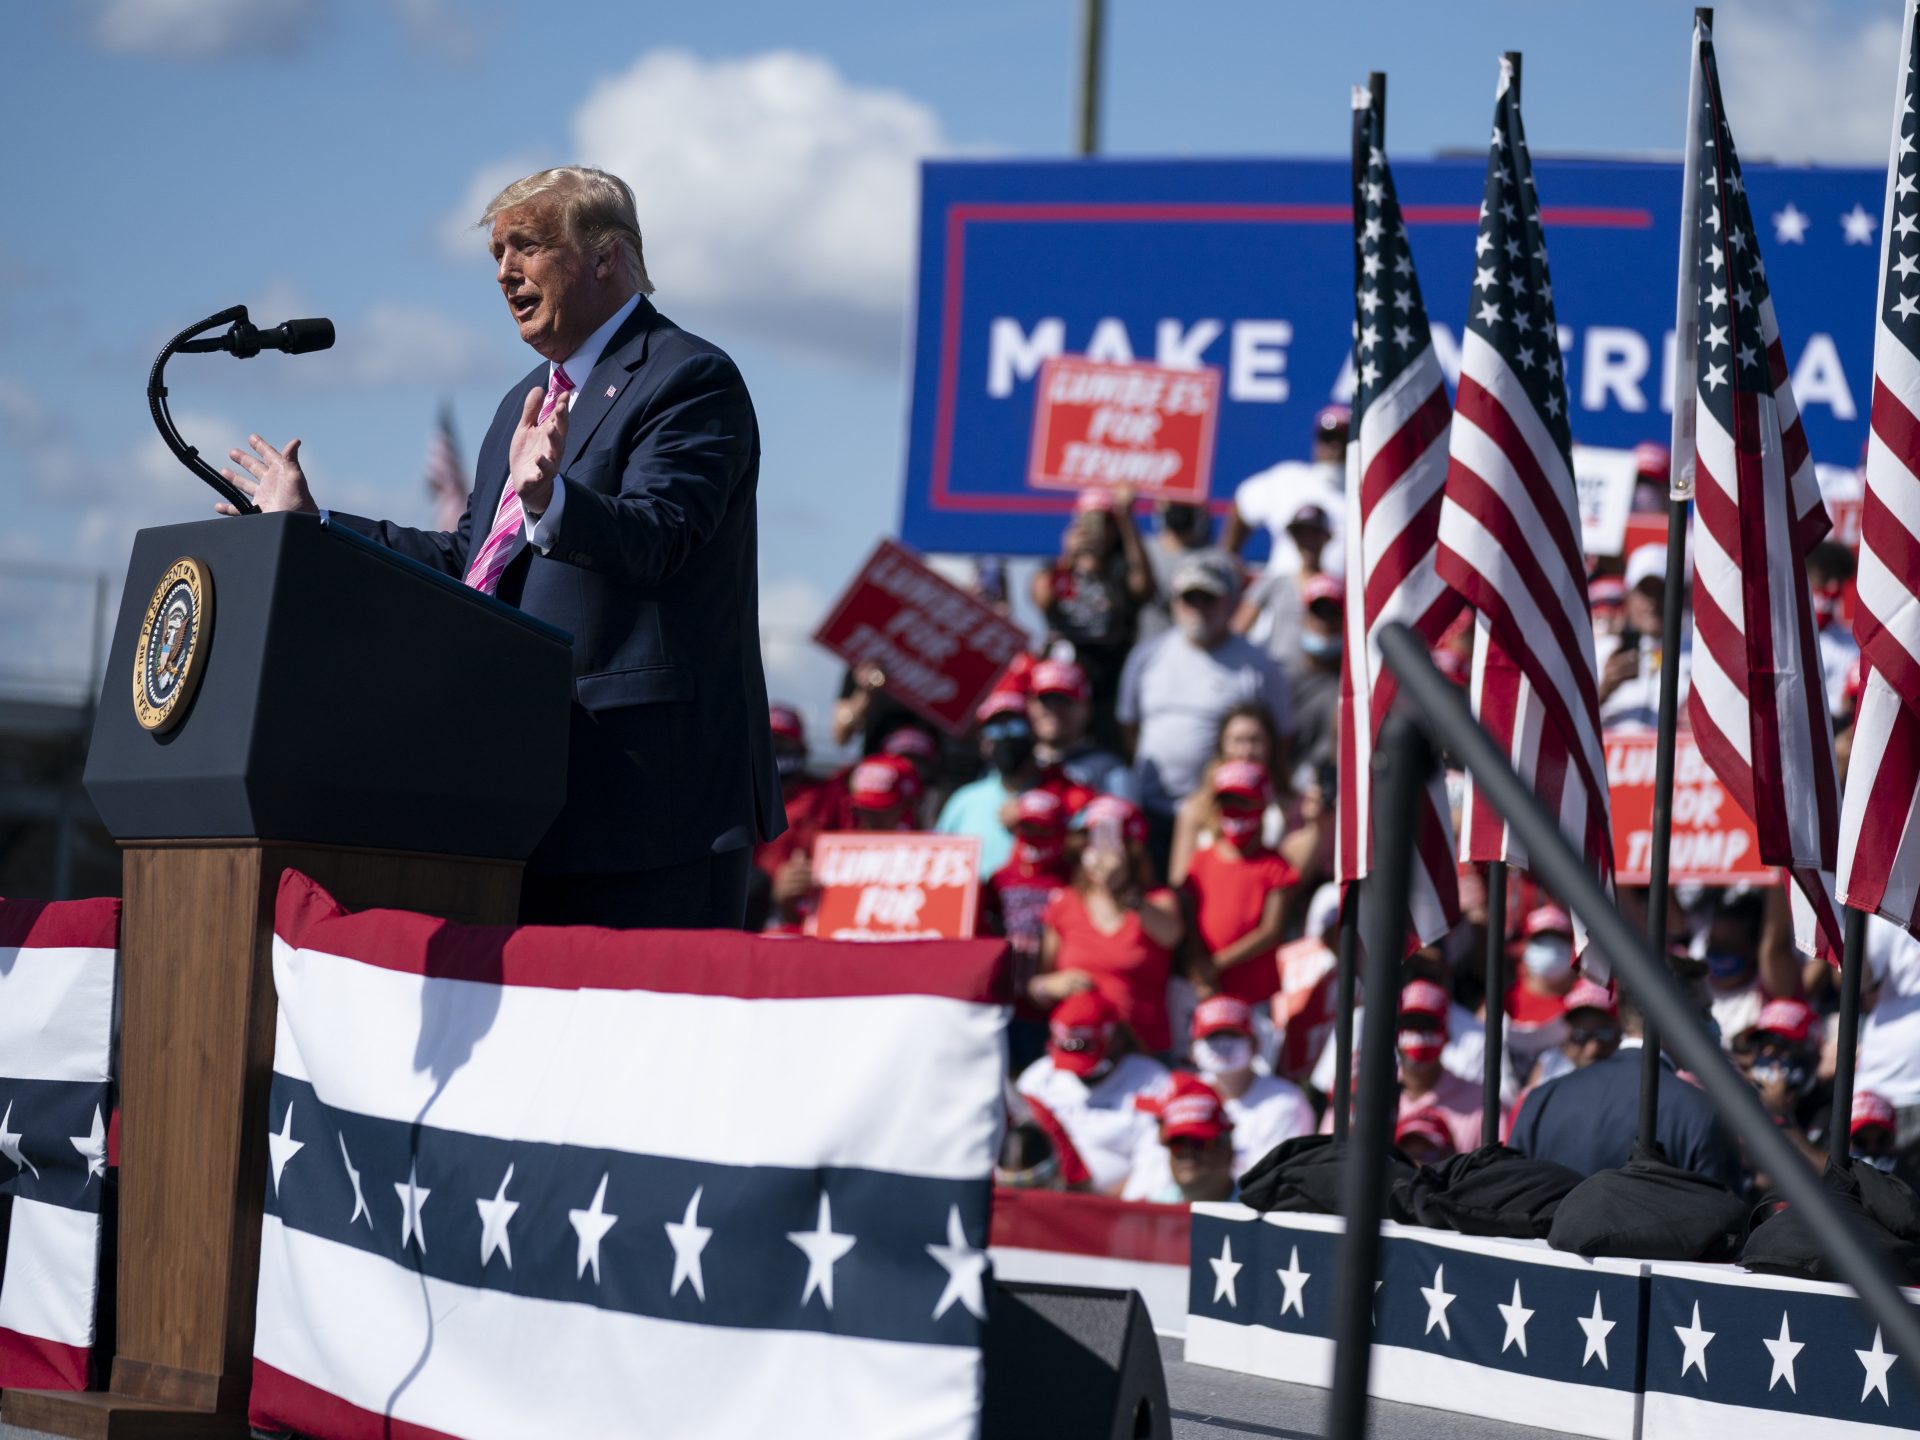 President Donald Trump speaks during a campaign rally at Robeson County Fairgrounds, Saturday, Oct. 24, 2020, in Lumberton, N.C.